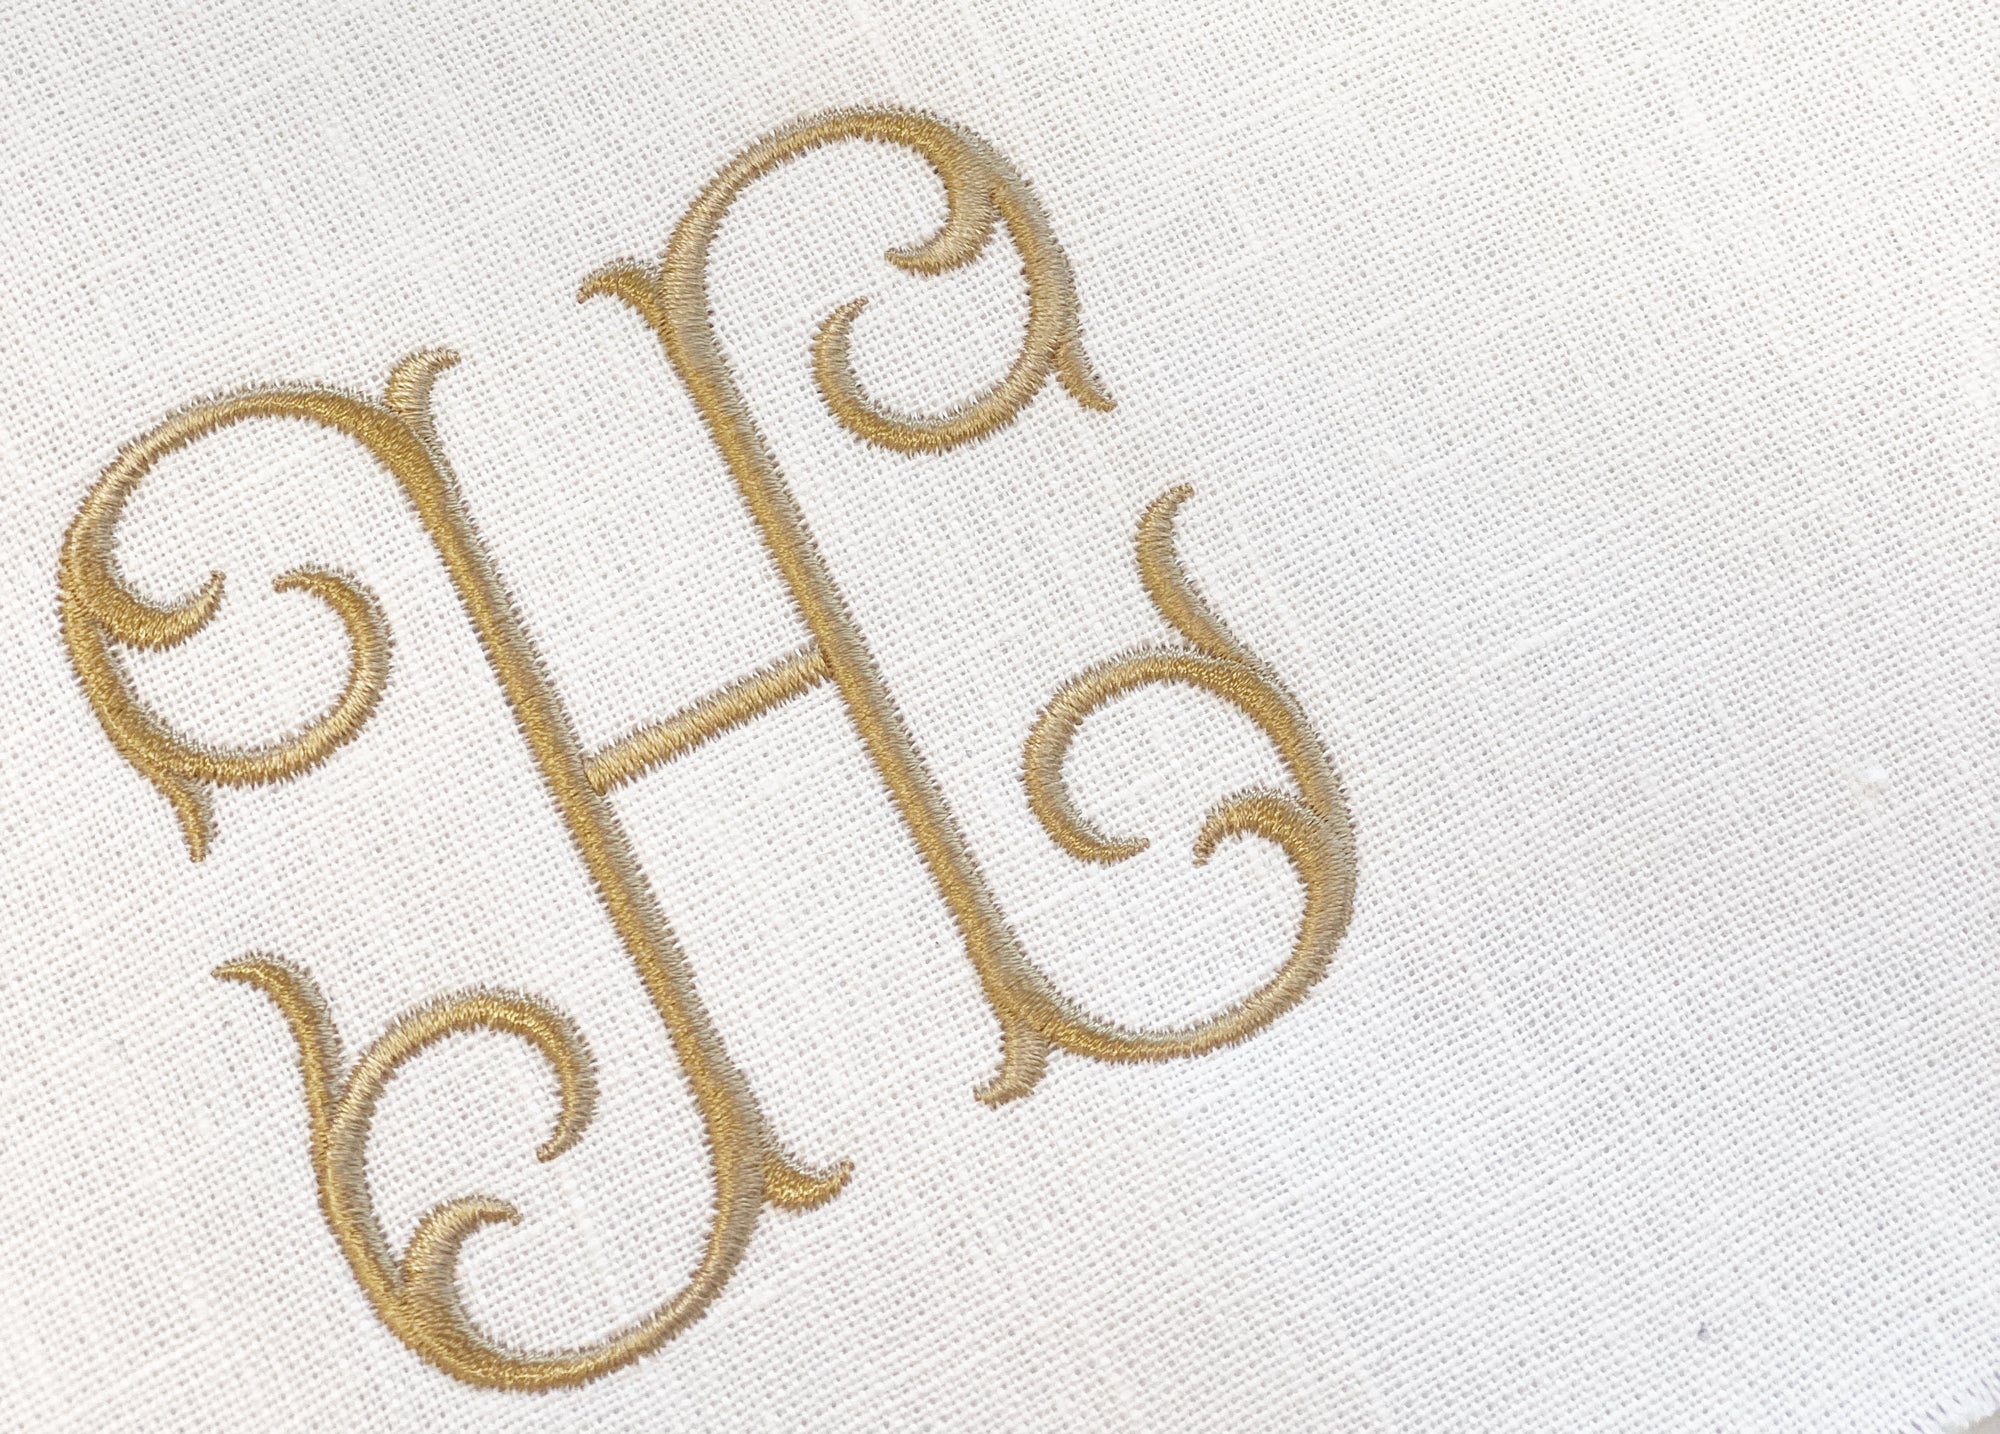 Single Monogram Couture Font for Embroidery